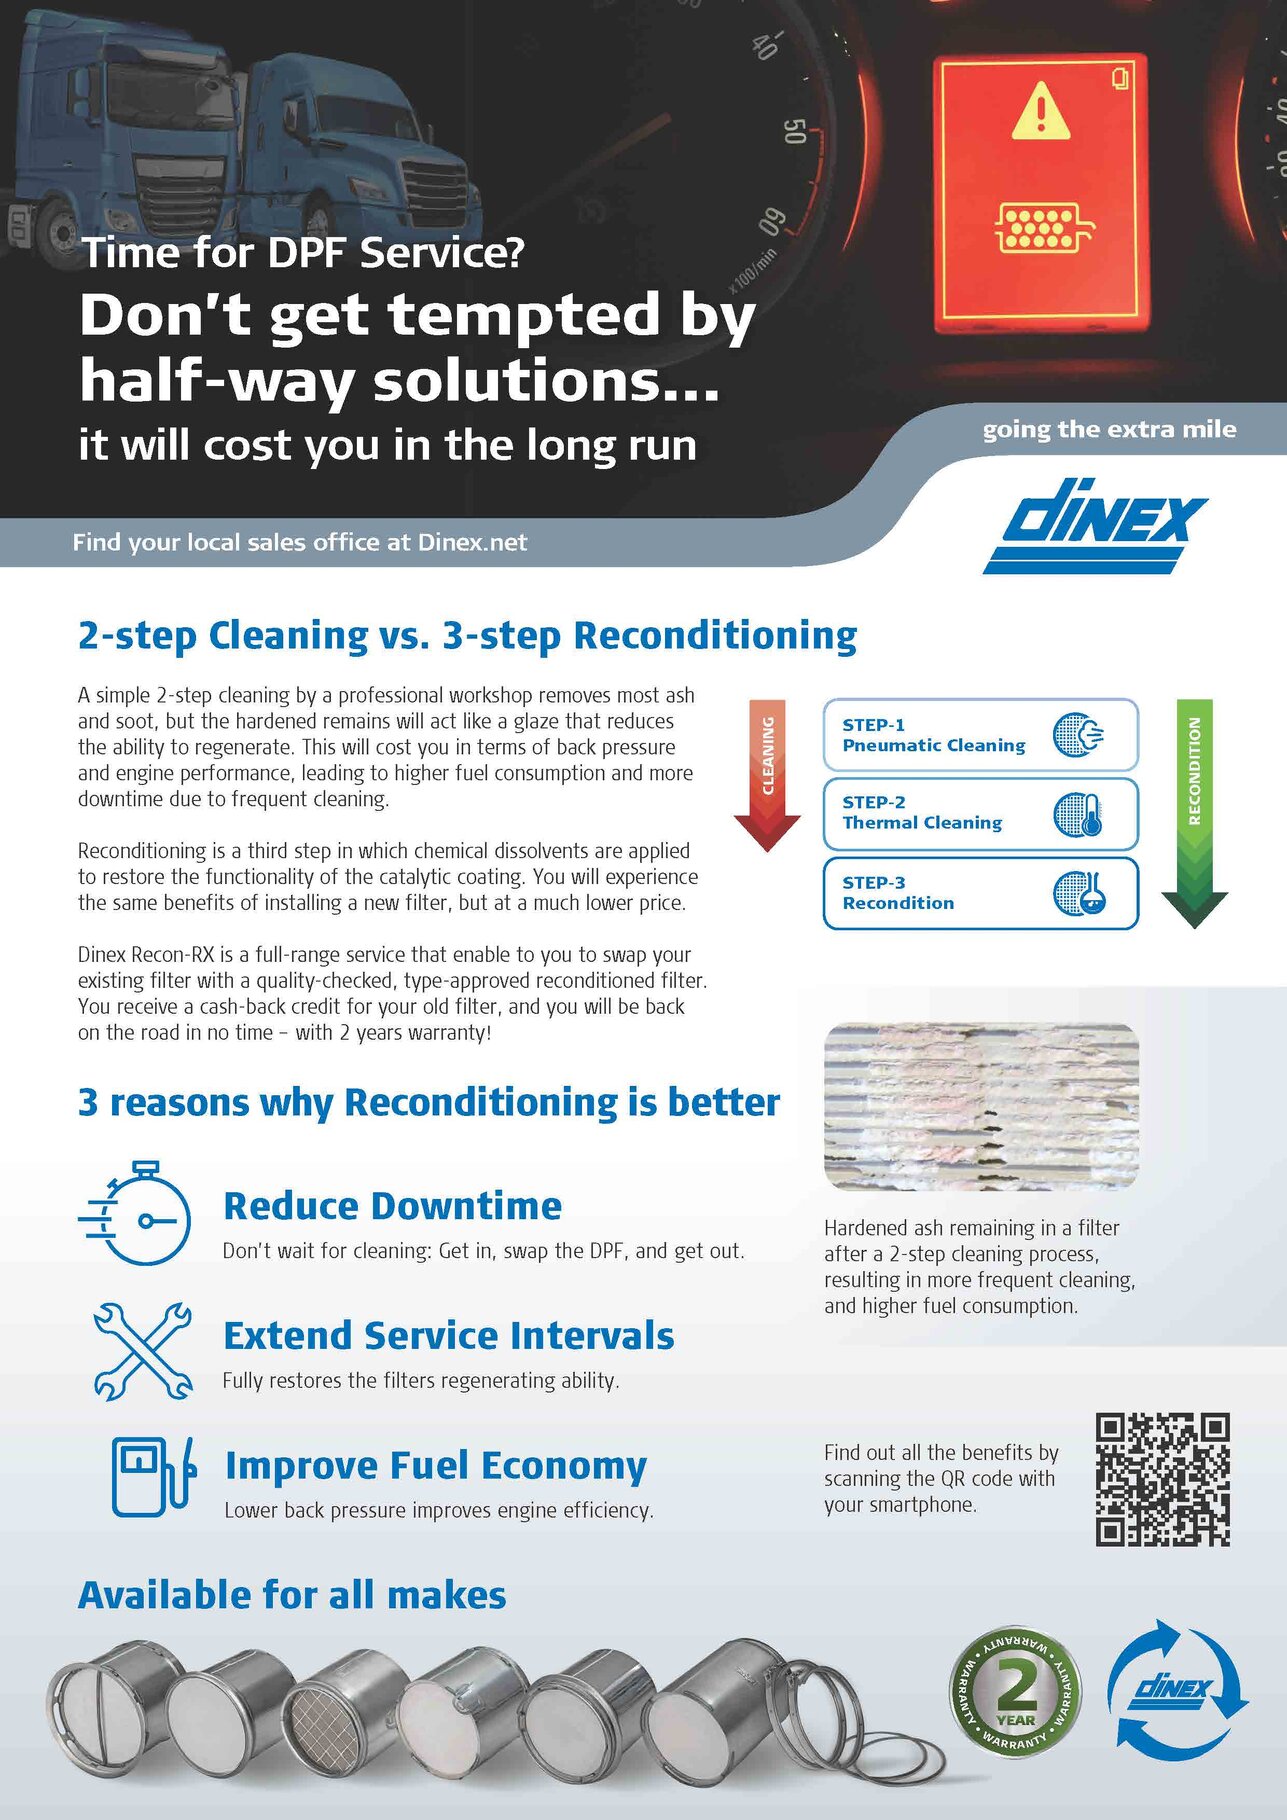 Dinex - Don’t get tempted by half-way DPF solutions